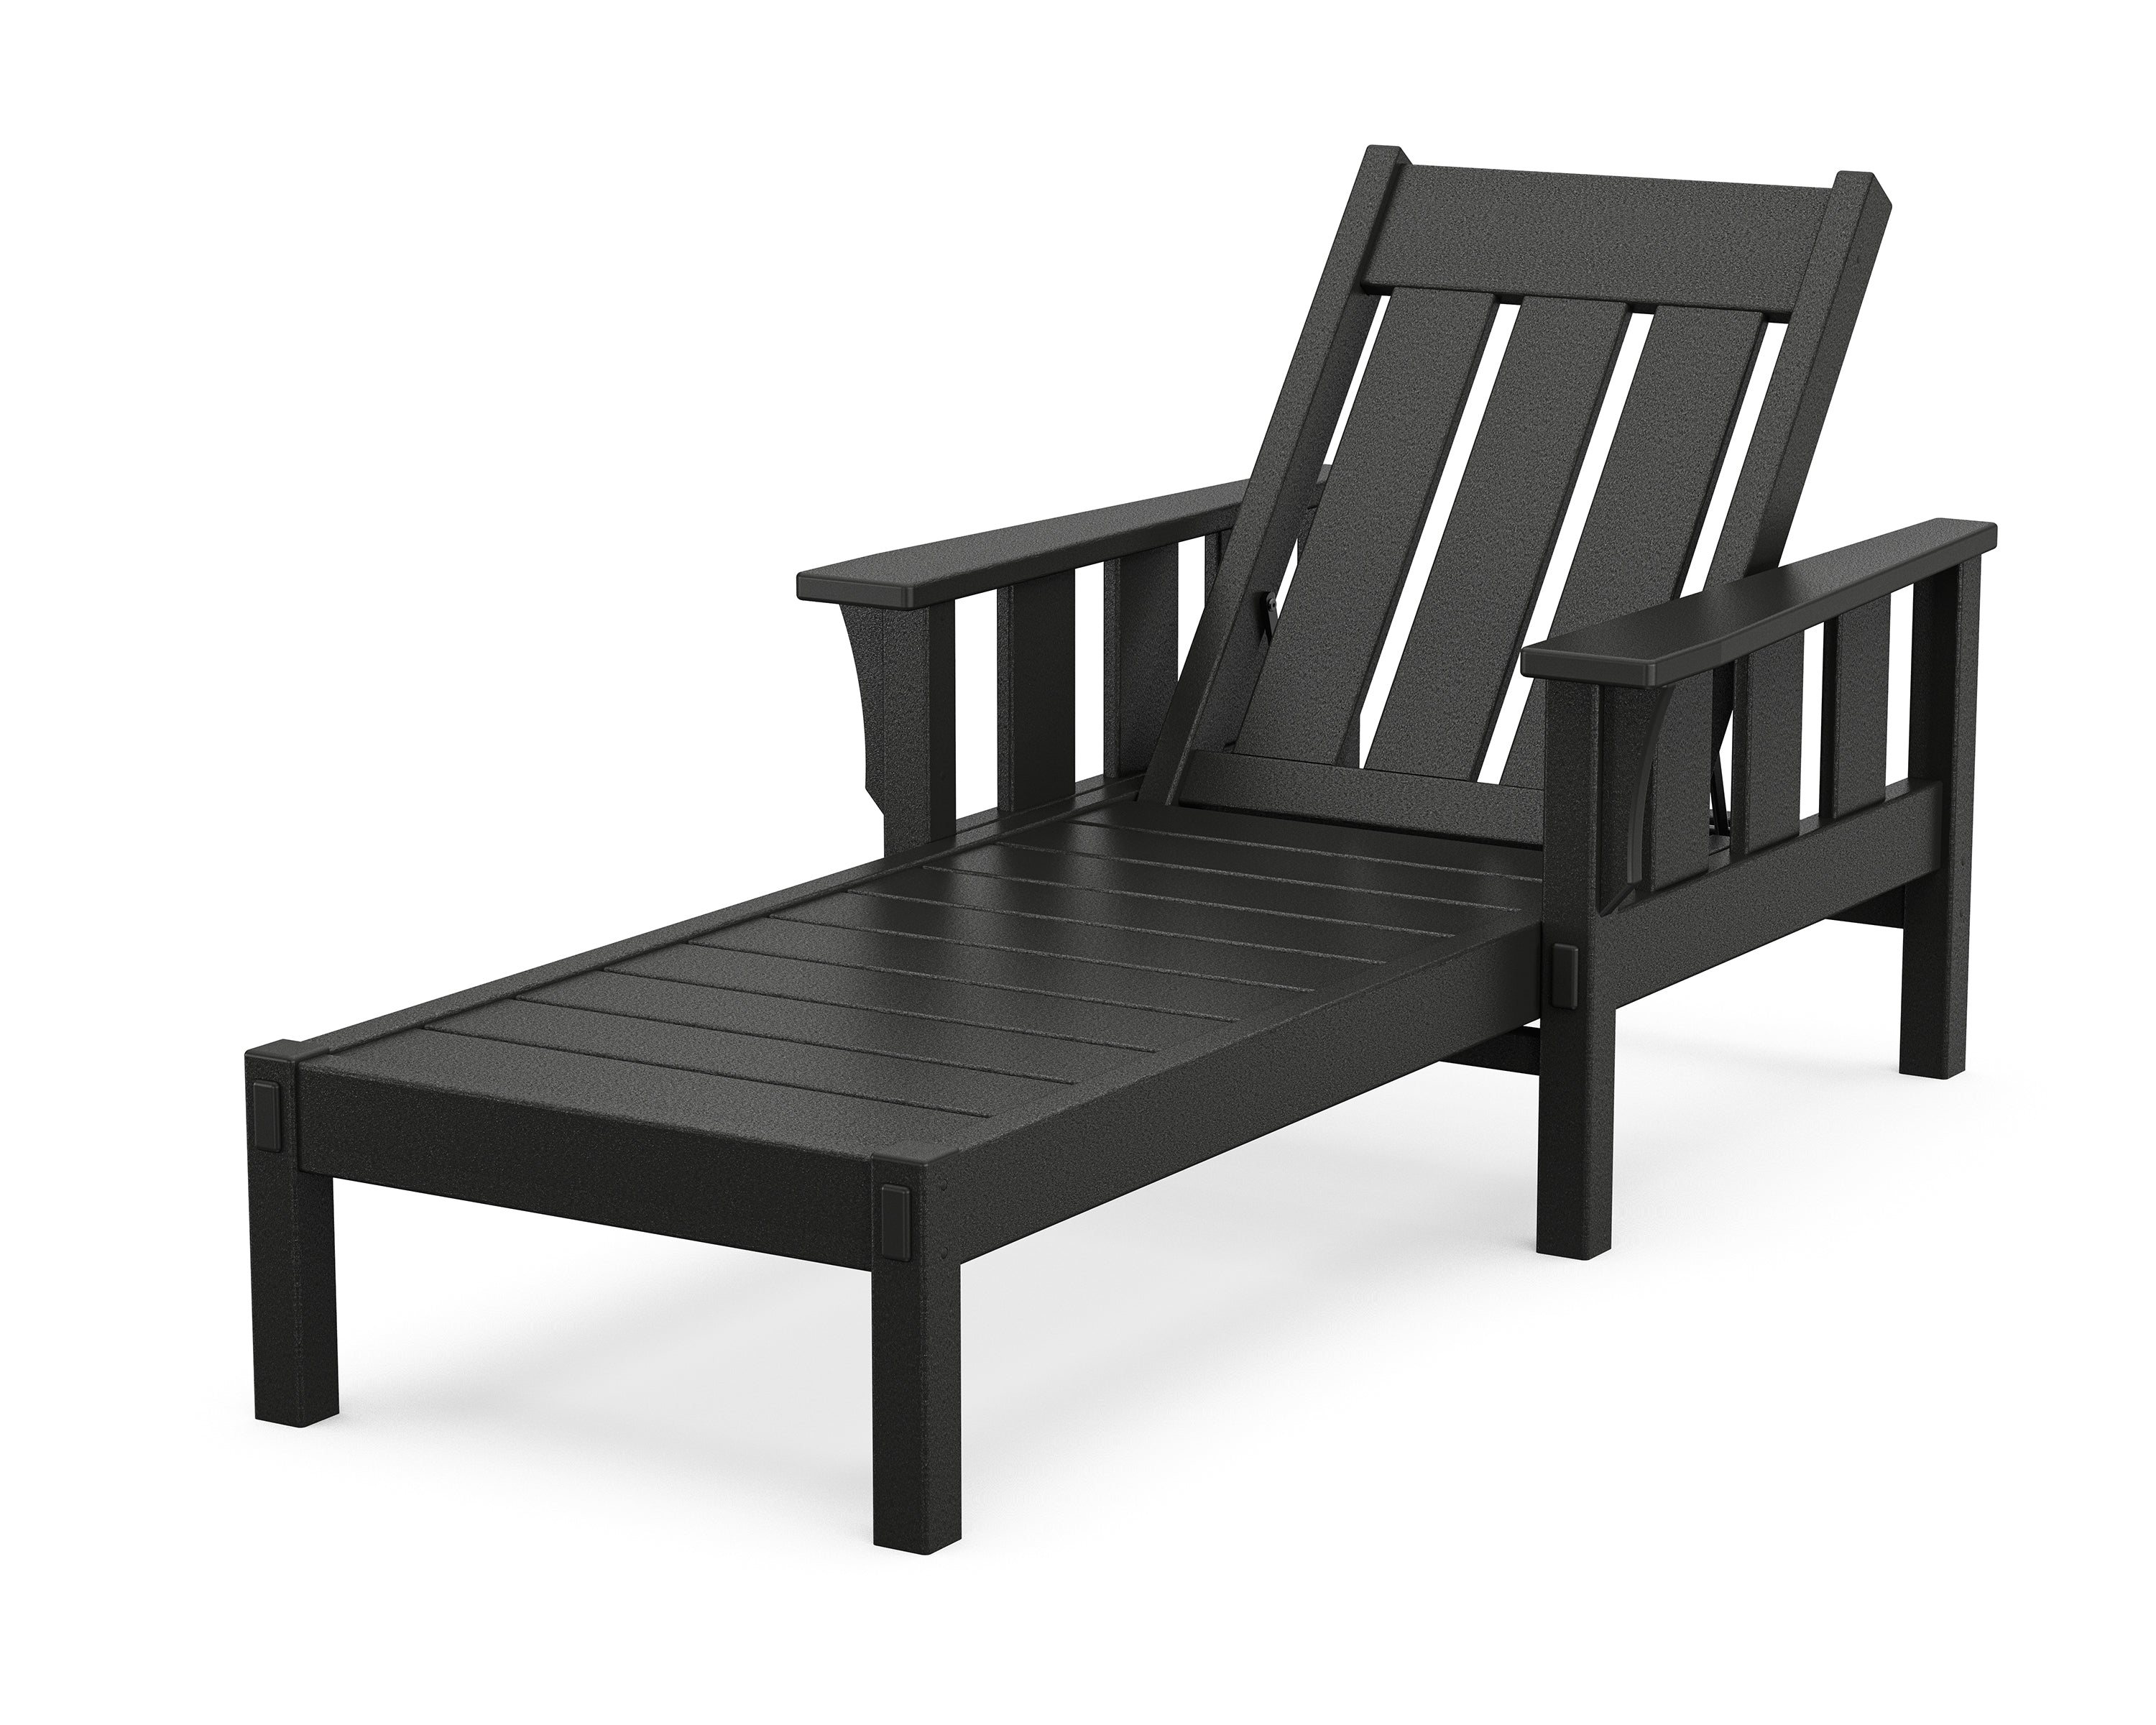 Martha Stewart by POLYWOOD® Acadia Chaise Lounge in Black